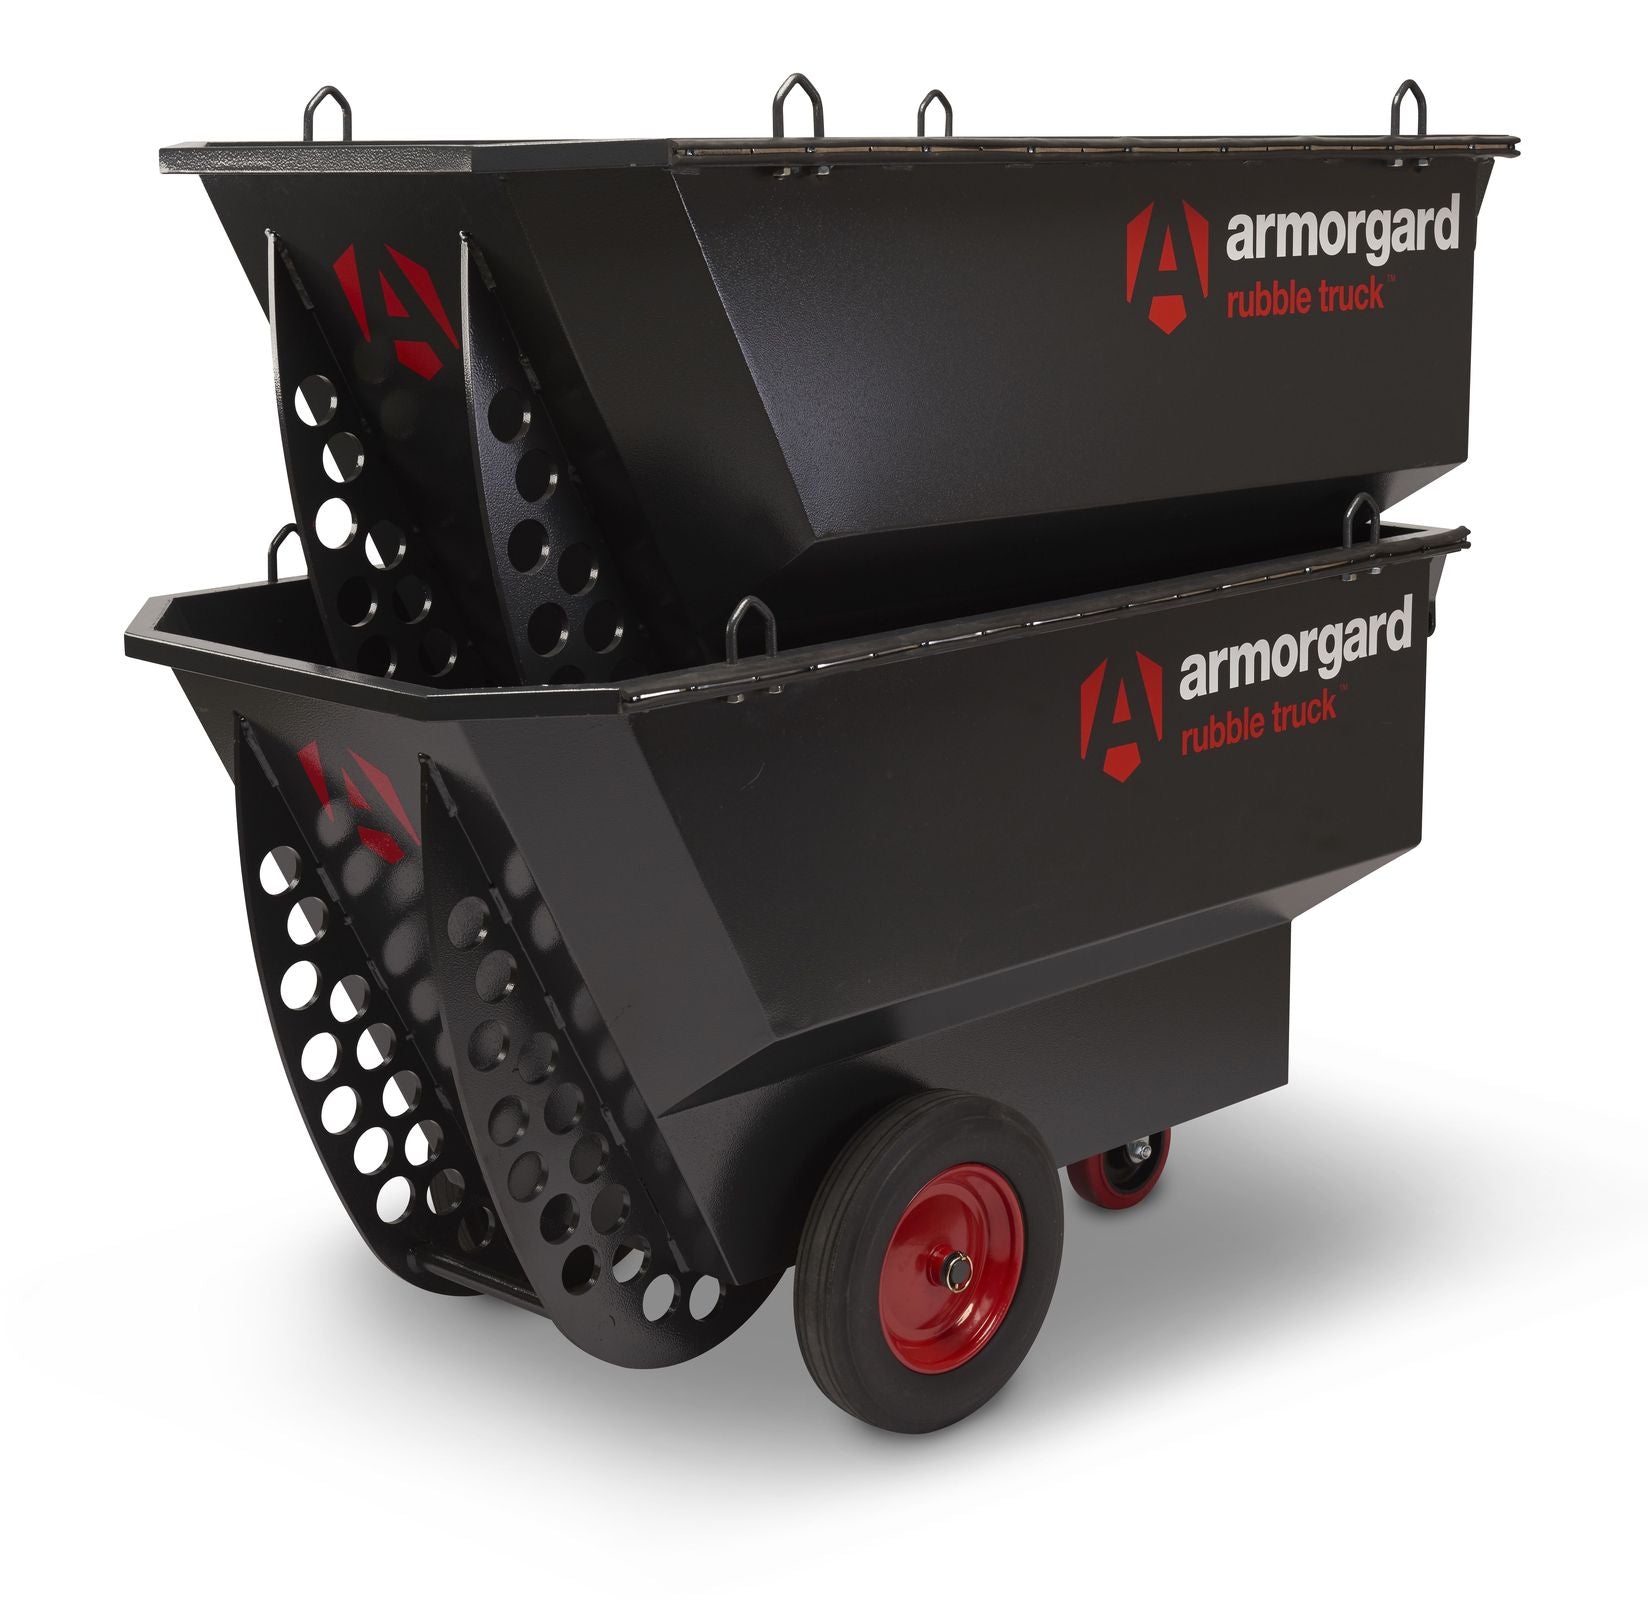 Armorgard Rubble Truck RT Stackable